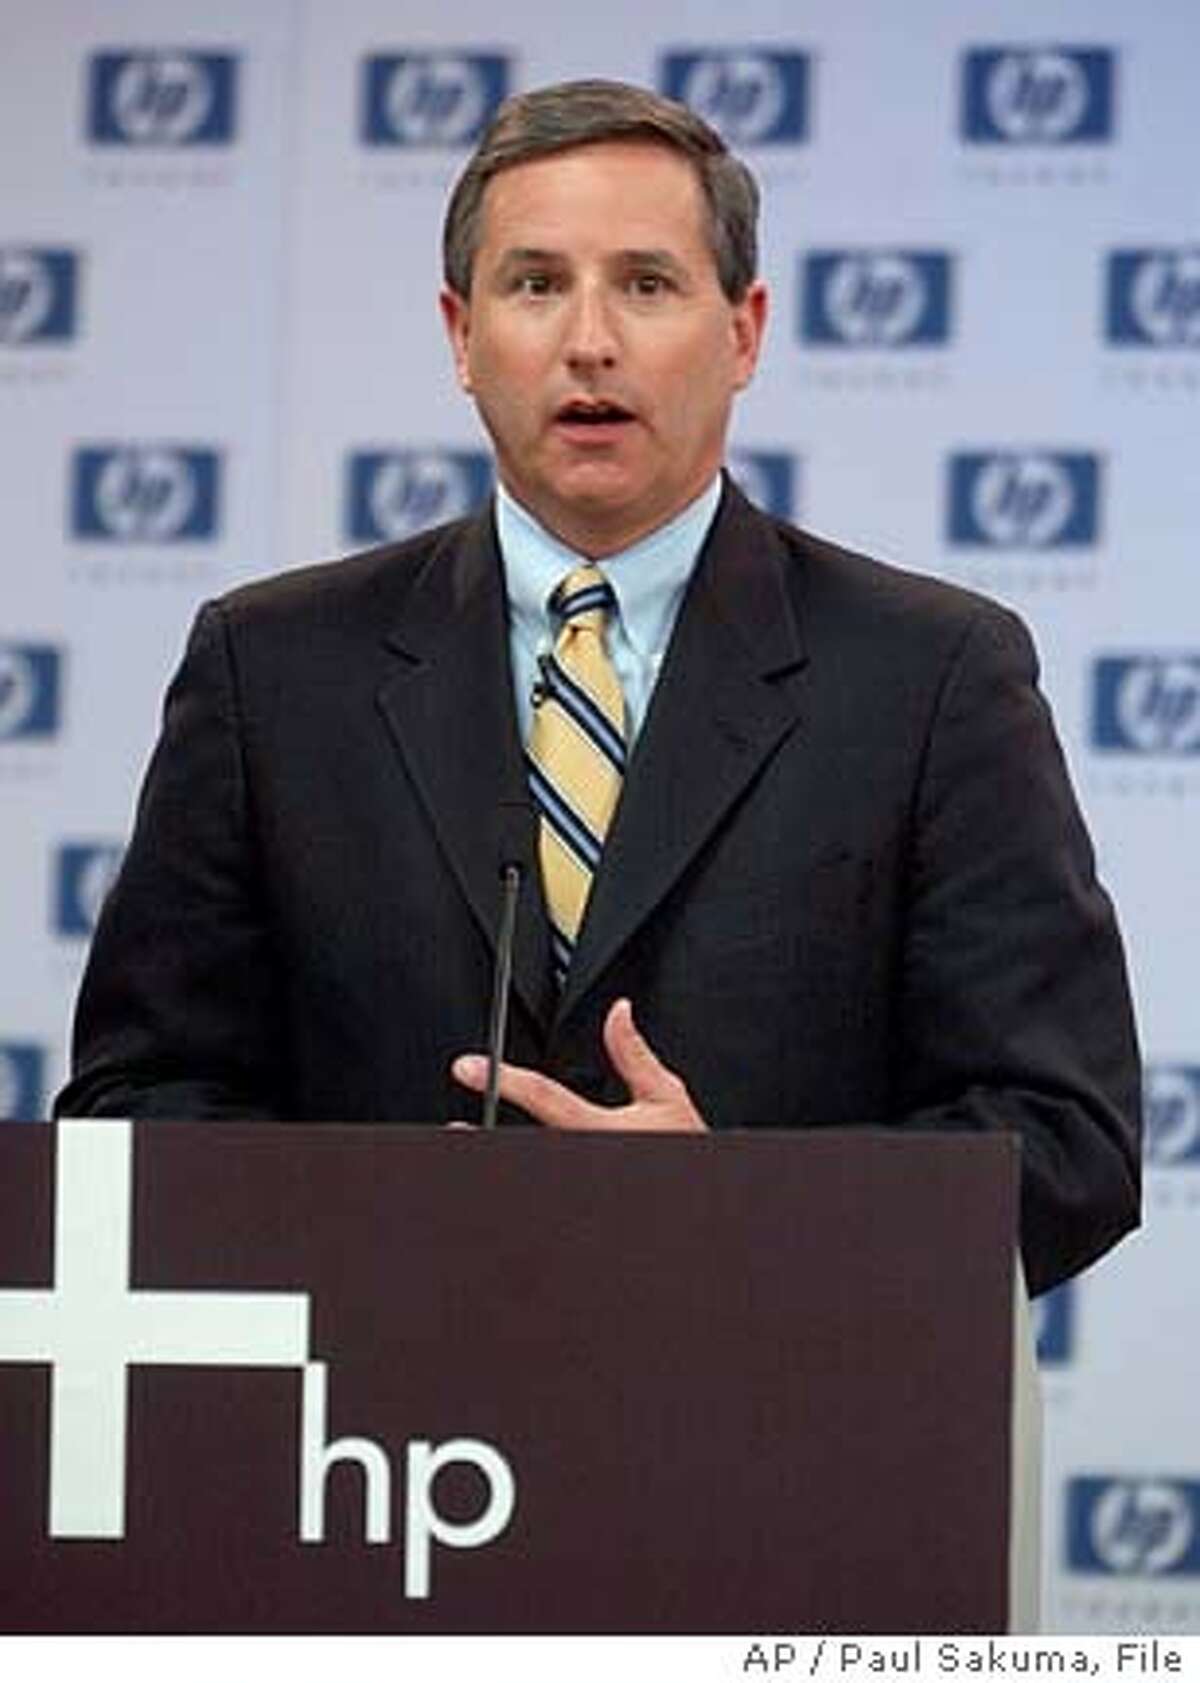 ** FILE ** Co. chief executive Mark Hurd gestures during a news conference at HP headquarters in Palo Alto, Calif., Wednesday, March 30, 2005. Computer maker Co. on Tuesday, July 19, 2005, said it will cut 14,500 jobs, about 10 percent of its full-time staff, as part of a restructuring plan designed to save $1.9 billion annually and boost business performance. "After a thorough review of our business, we have formulated a plan that will enable HP to begin delivering its full potential," Hurd said in a statement Tuesday. (AP Photo/Paul Sakuma)